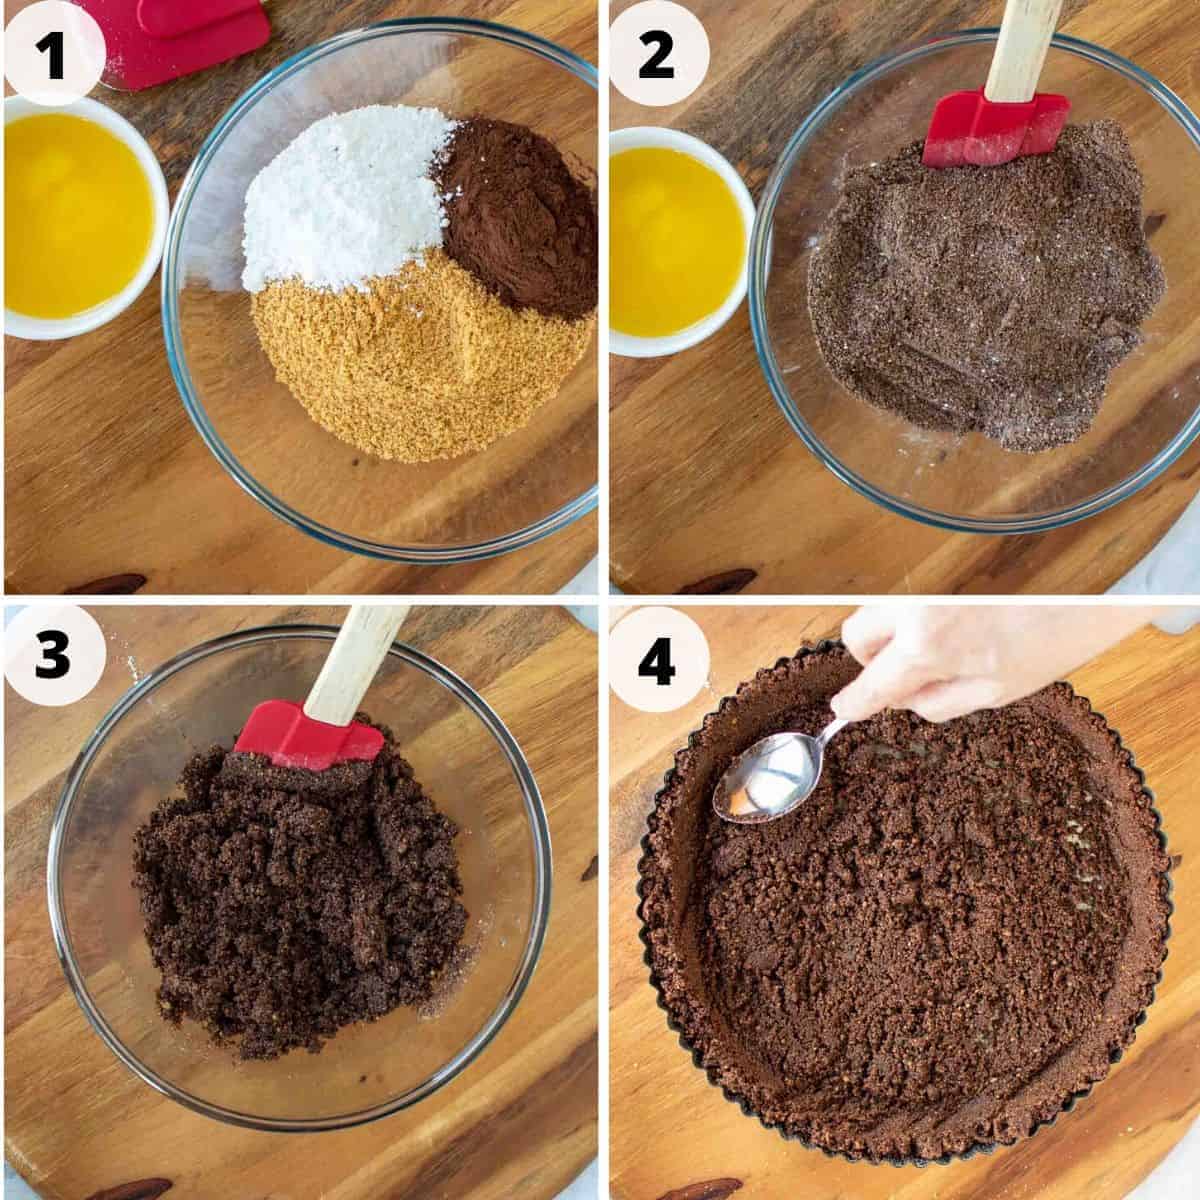 four images showing preparation of chocolate crumb crust.